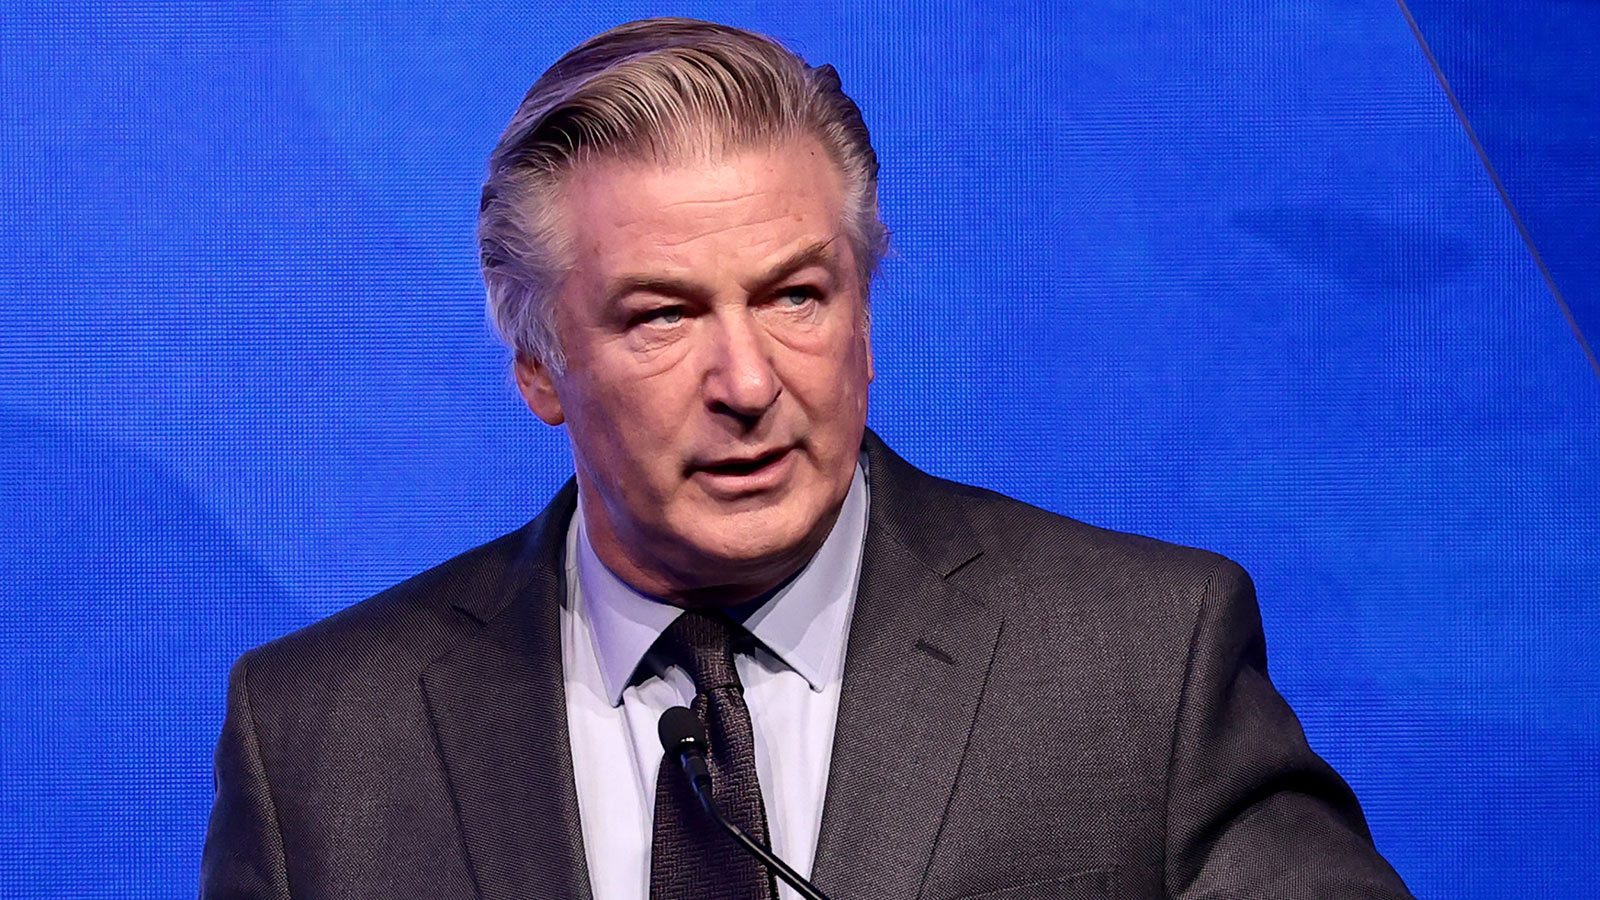 Alec Baldwin feels “blindsided” by today’s charges, his attorney says